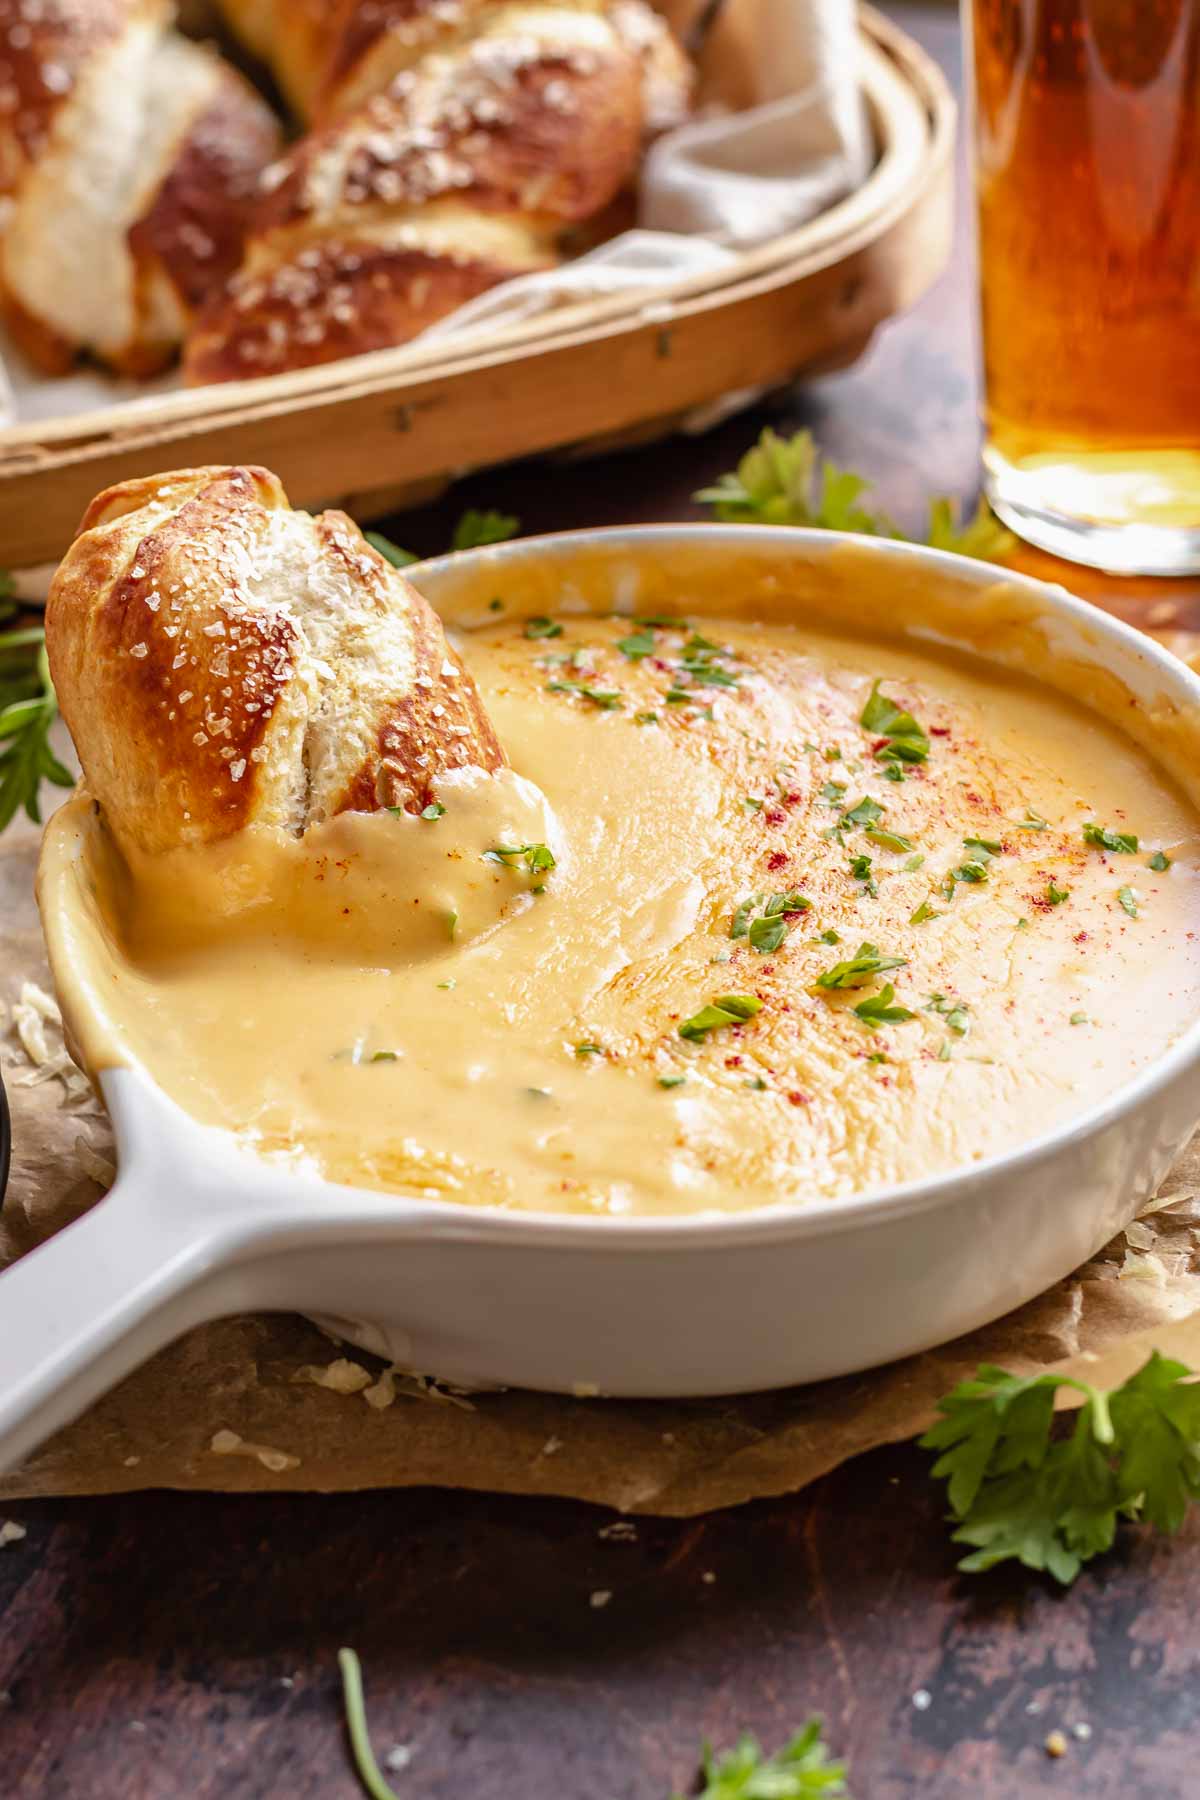 Soft pretzel in a bowl of beer cheese.